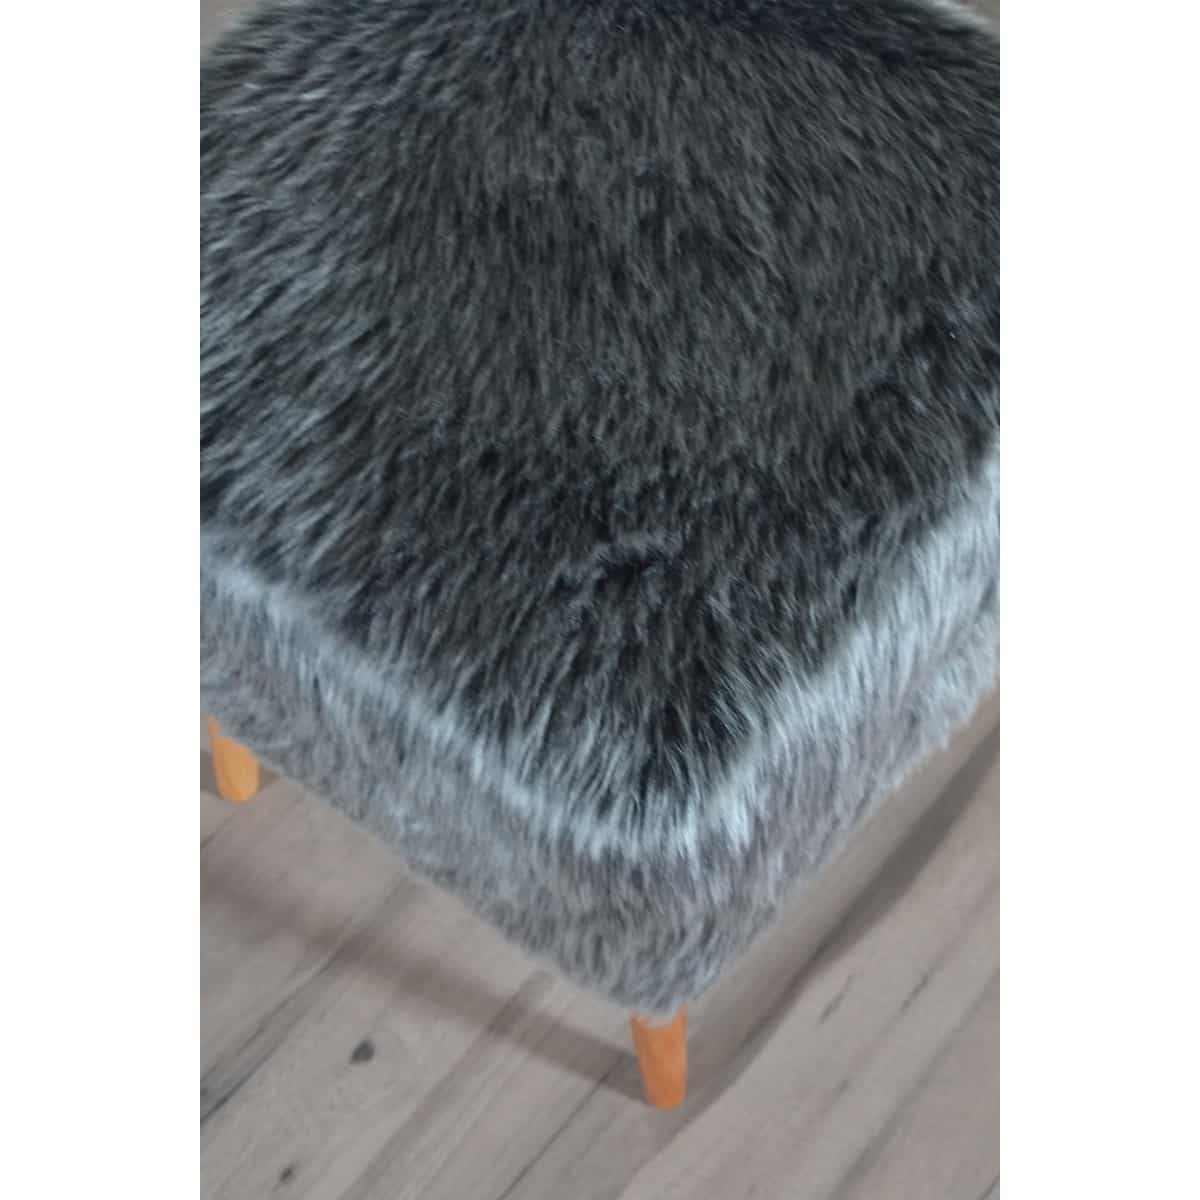 Pyramid Home Decor 17 Inch Round Faux Fur Ottoman - Fluffy Foot Stool with Fur Top and Wood Legs - Brown